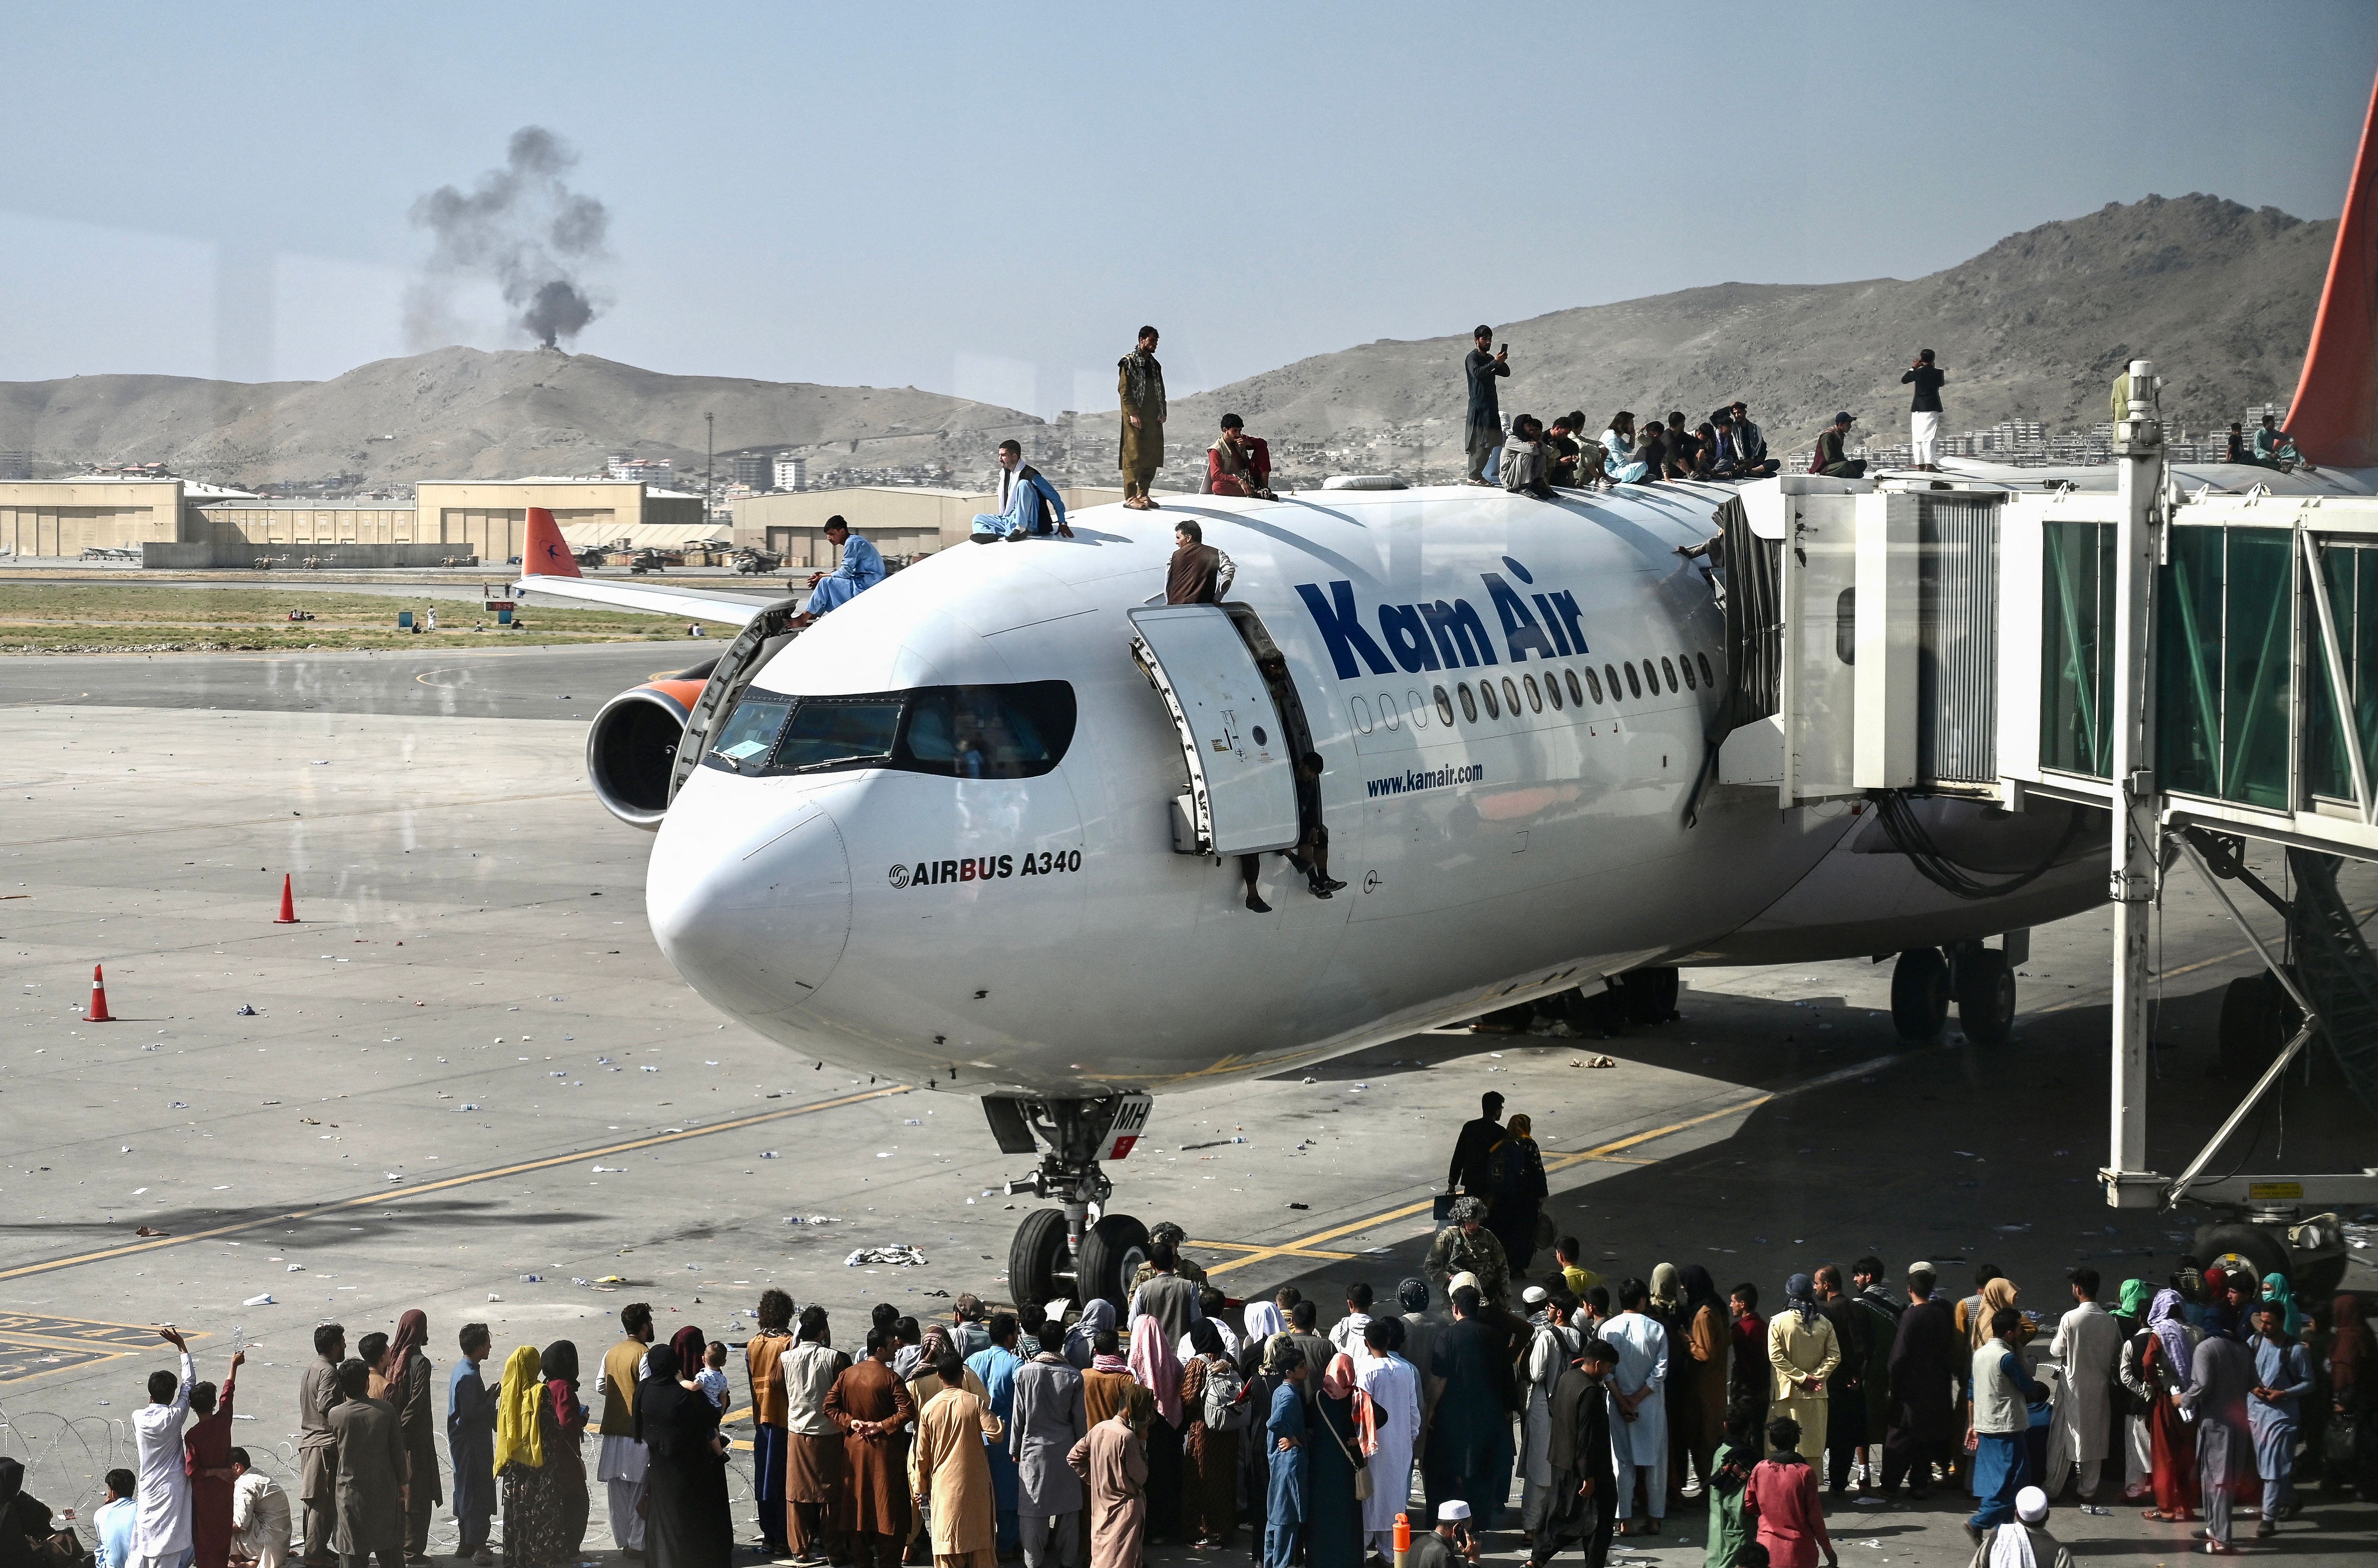 Afghans climbing on top of plane